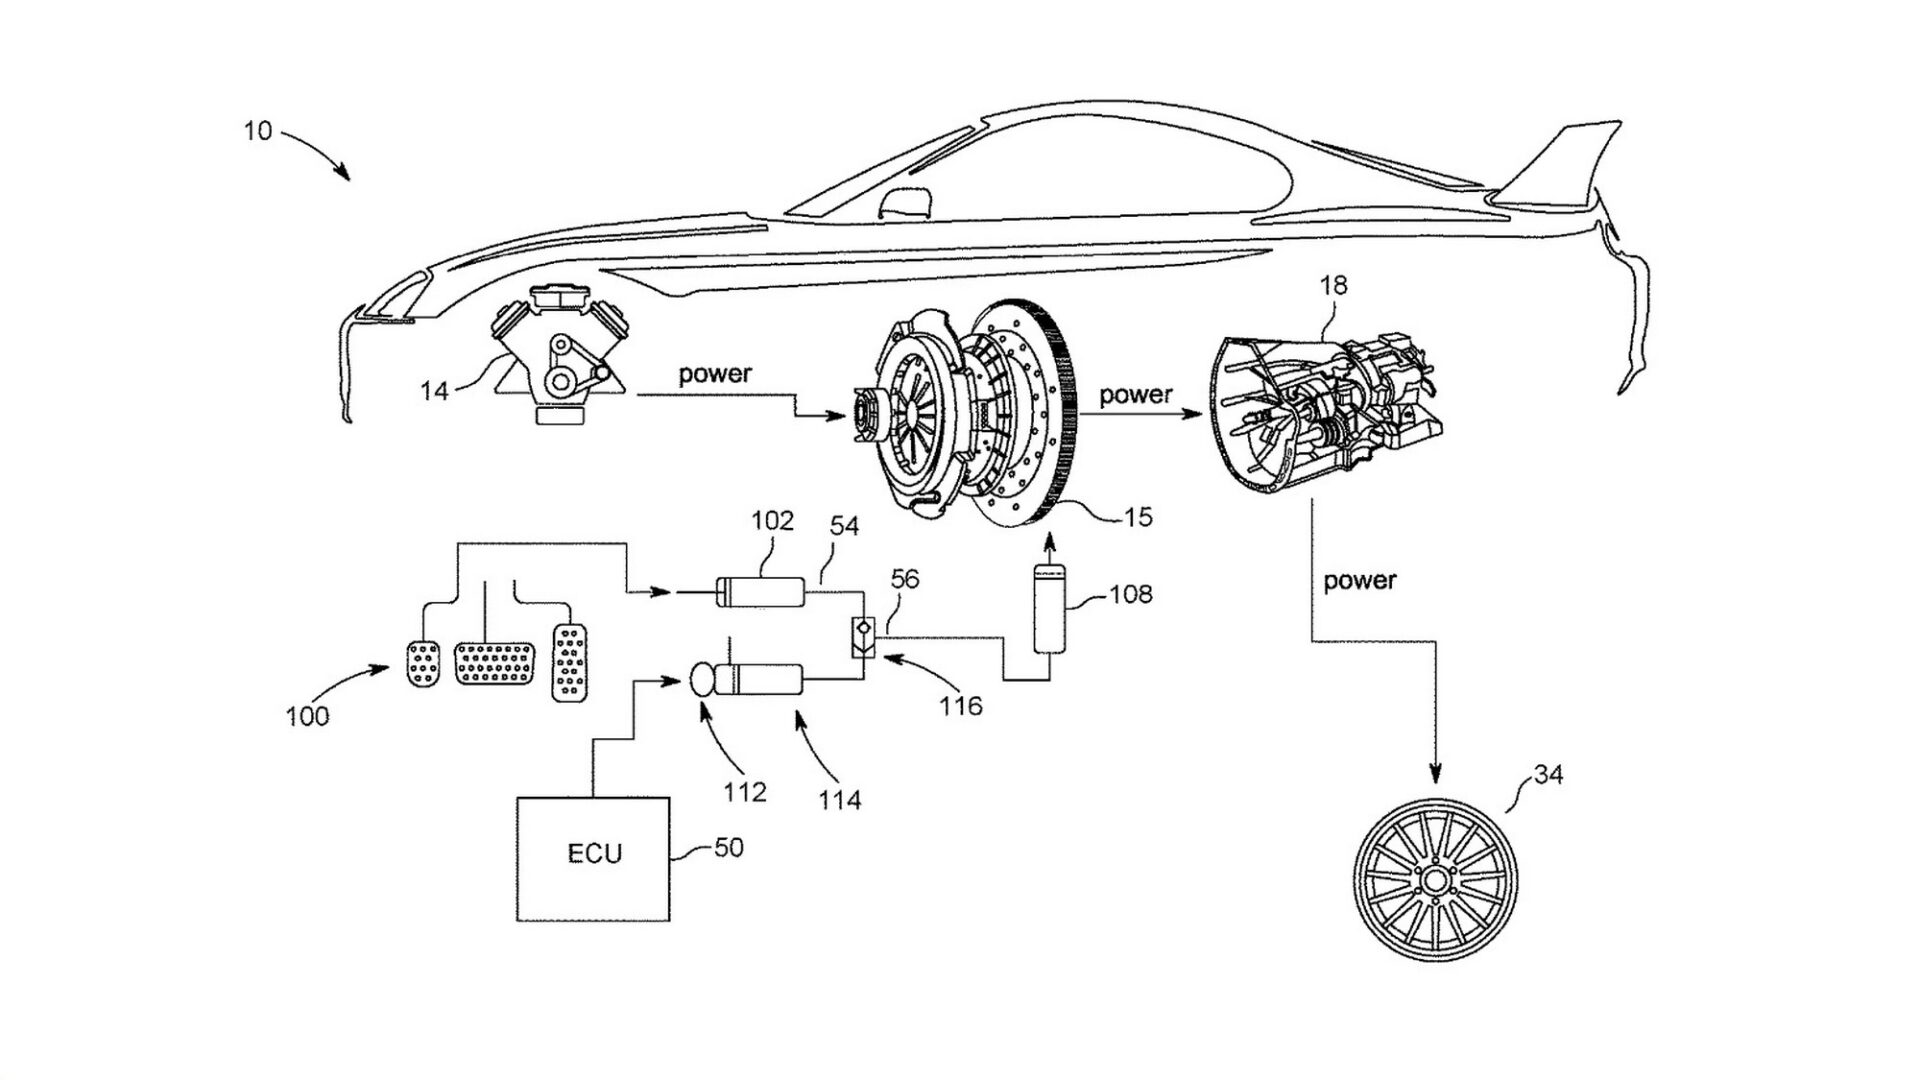 Toyota is Developing a Manual Transmission for Hybrid Cars